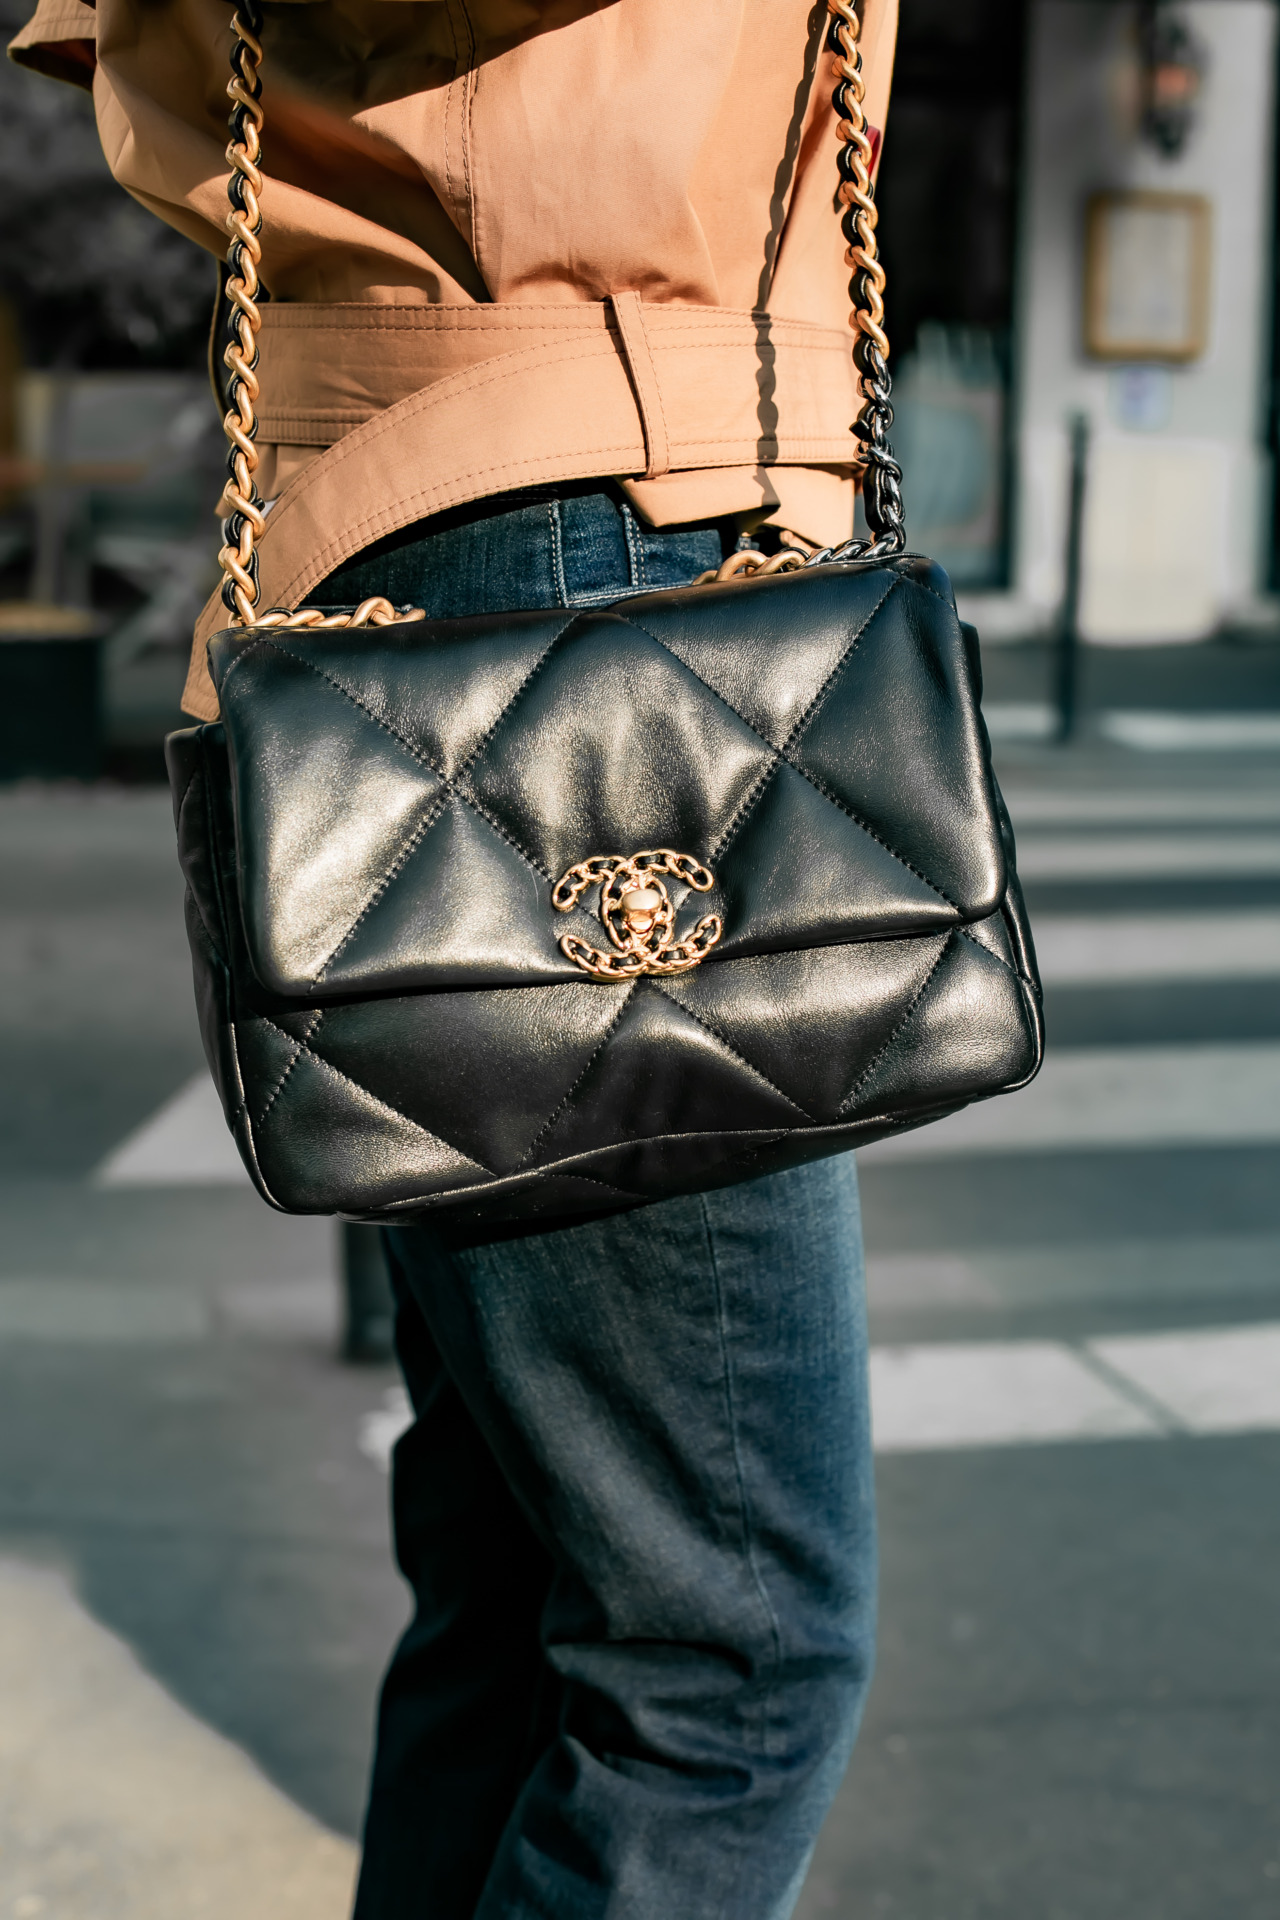 Why Buying A Chanel 2.55 Could Be The Best Investment Of Your Life